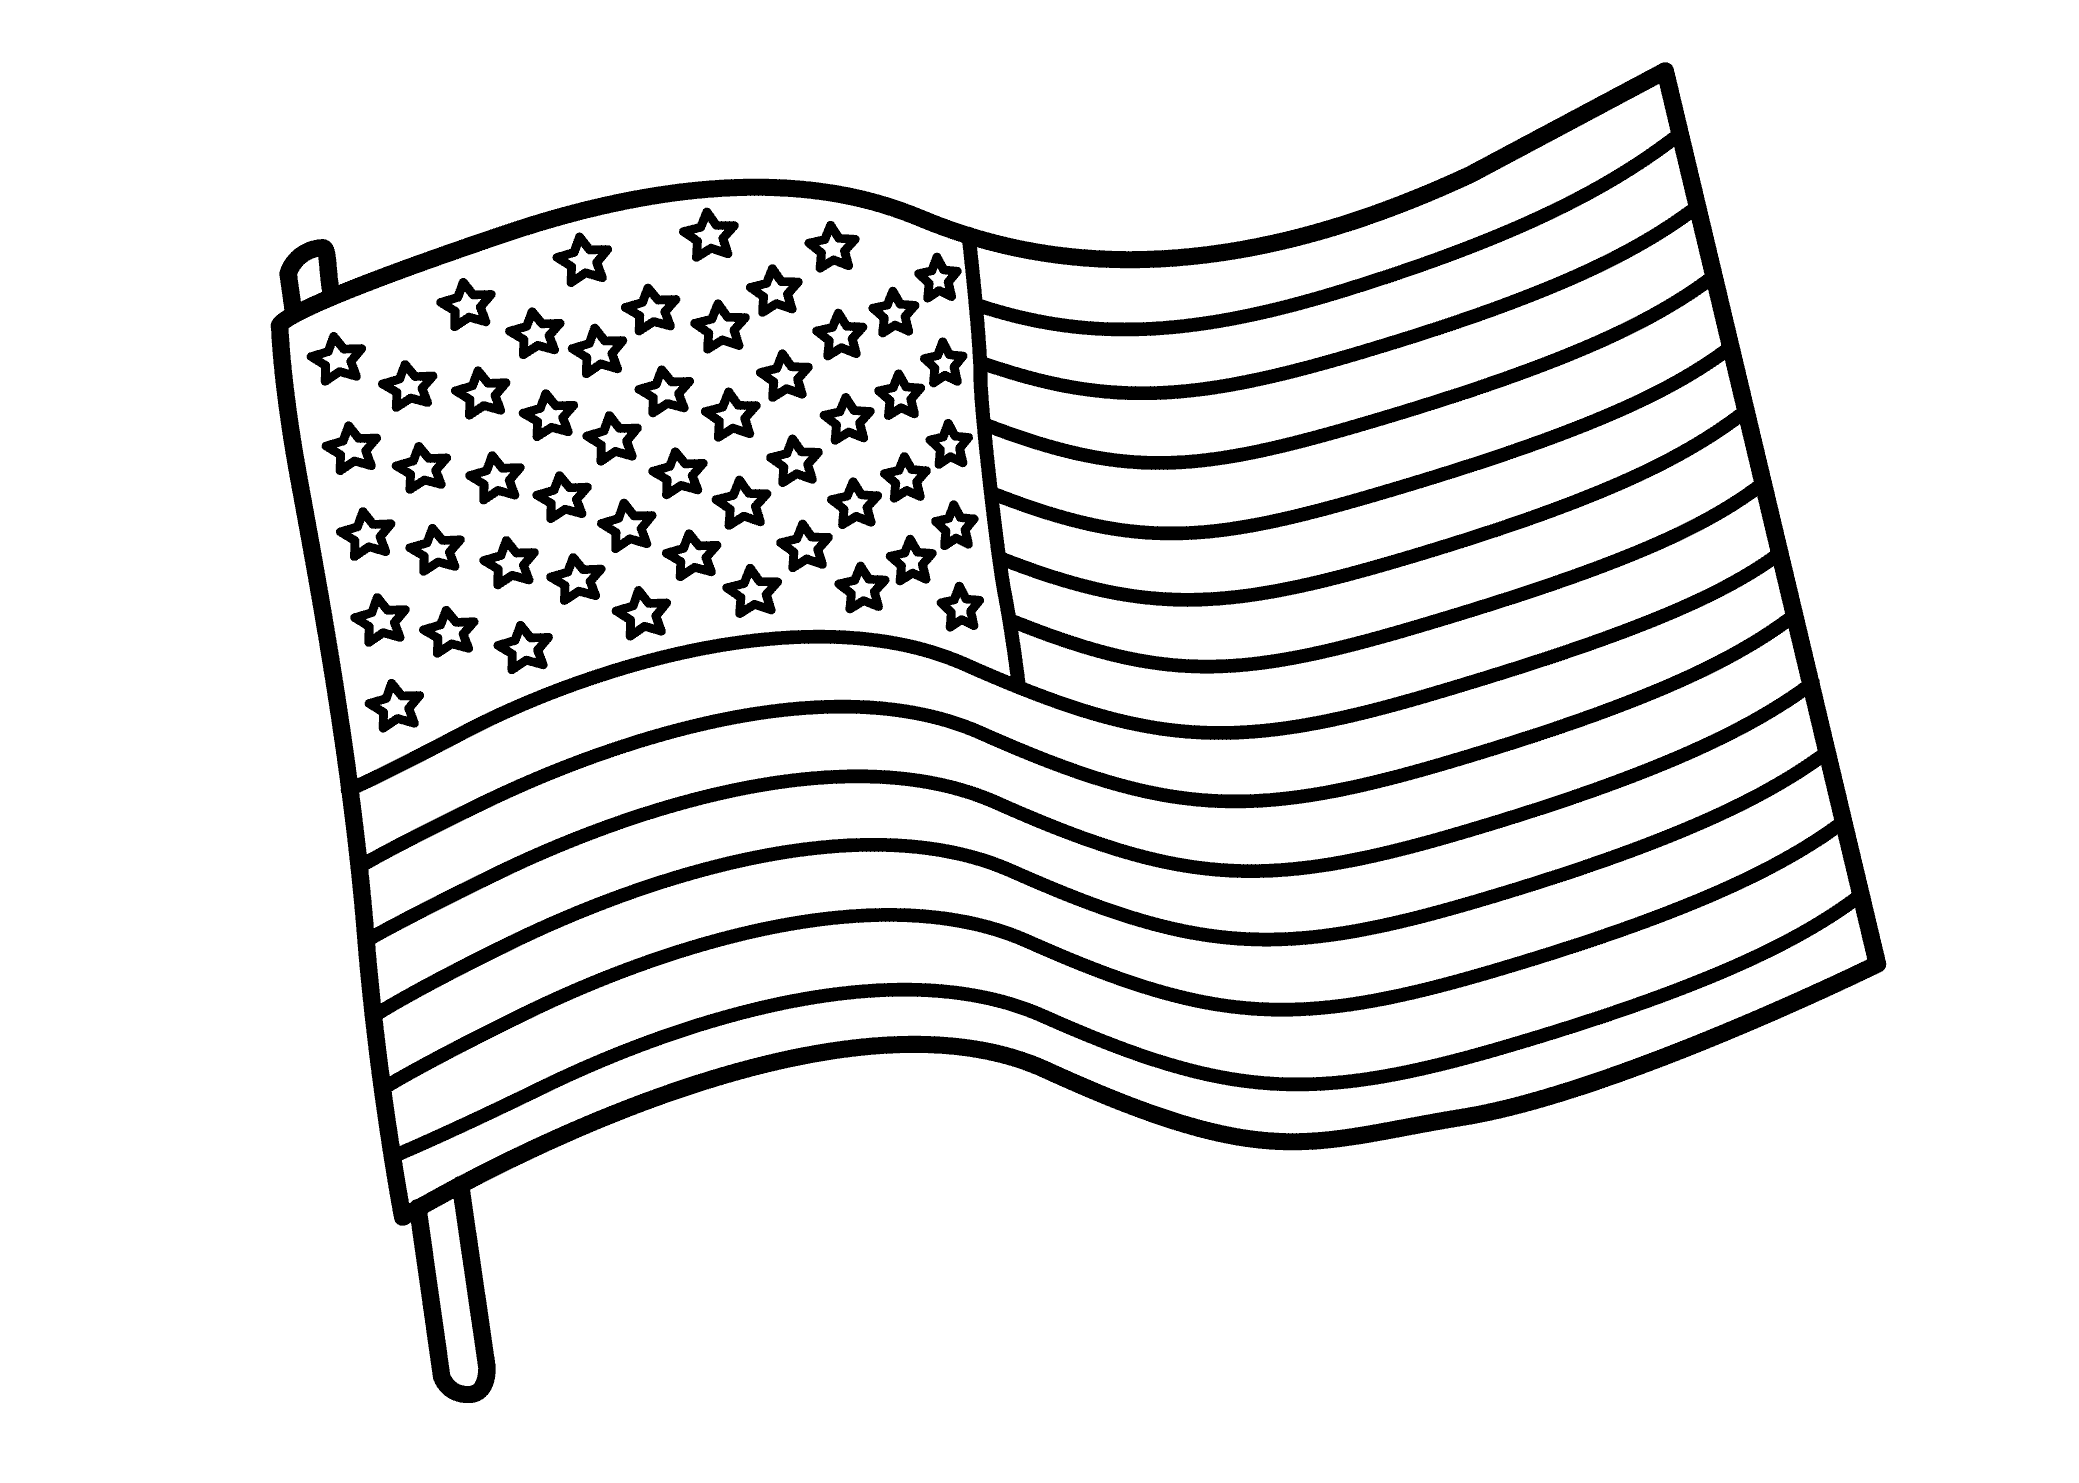 Inesyfederico-clases: Flags Coloring Sheets